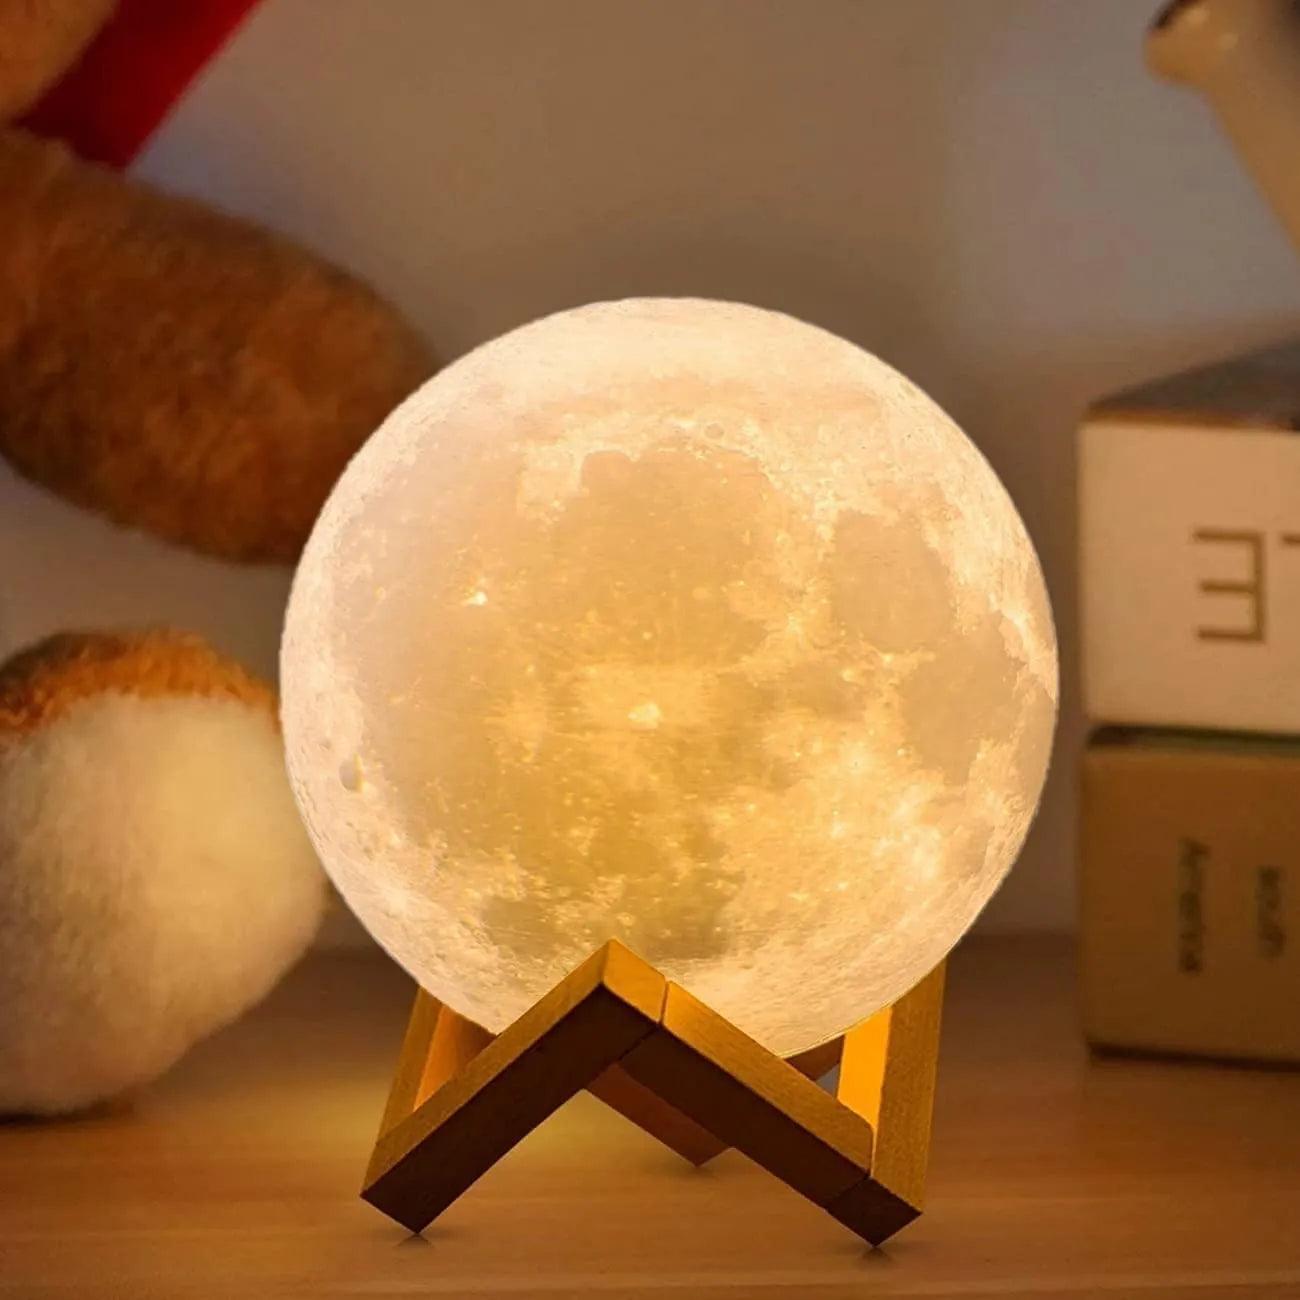 Moonlit Magic 3D Printed Moon Lamp with Touch Control  ourlum.com   